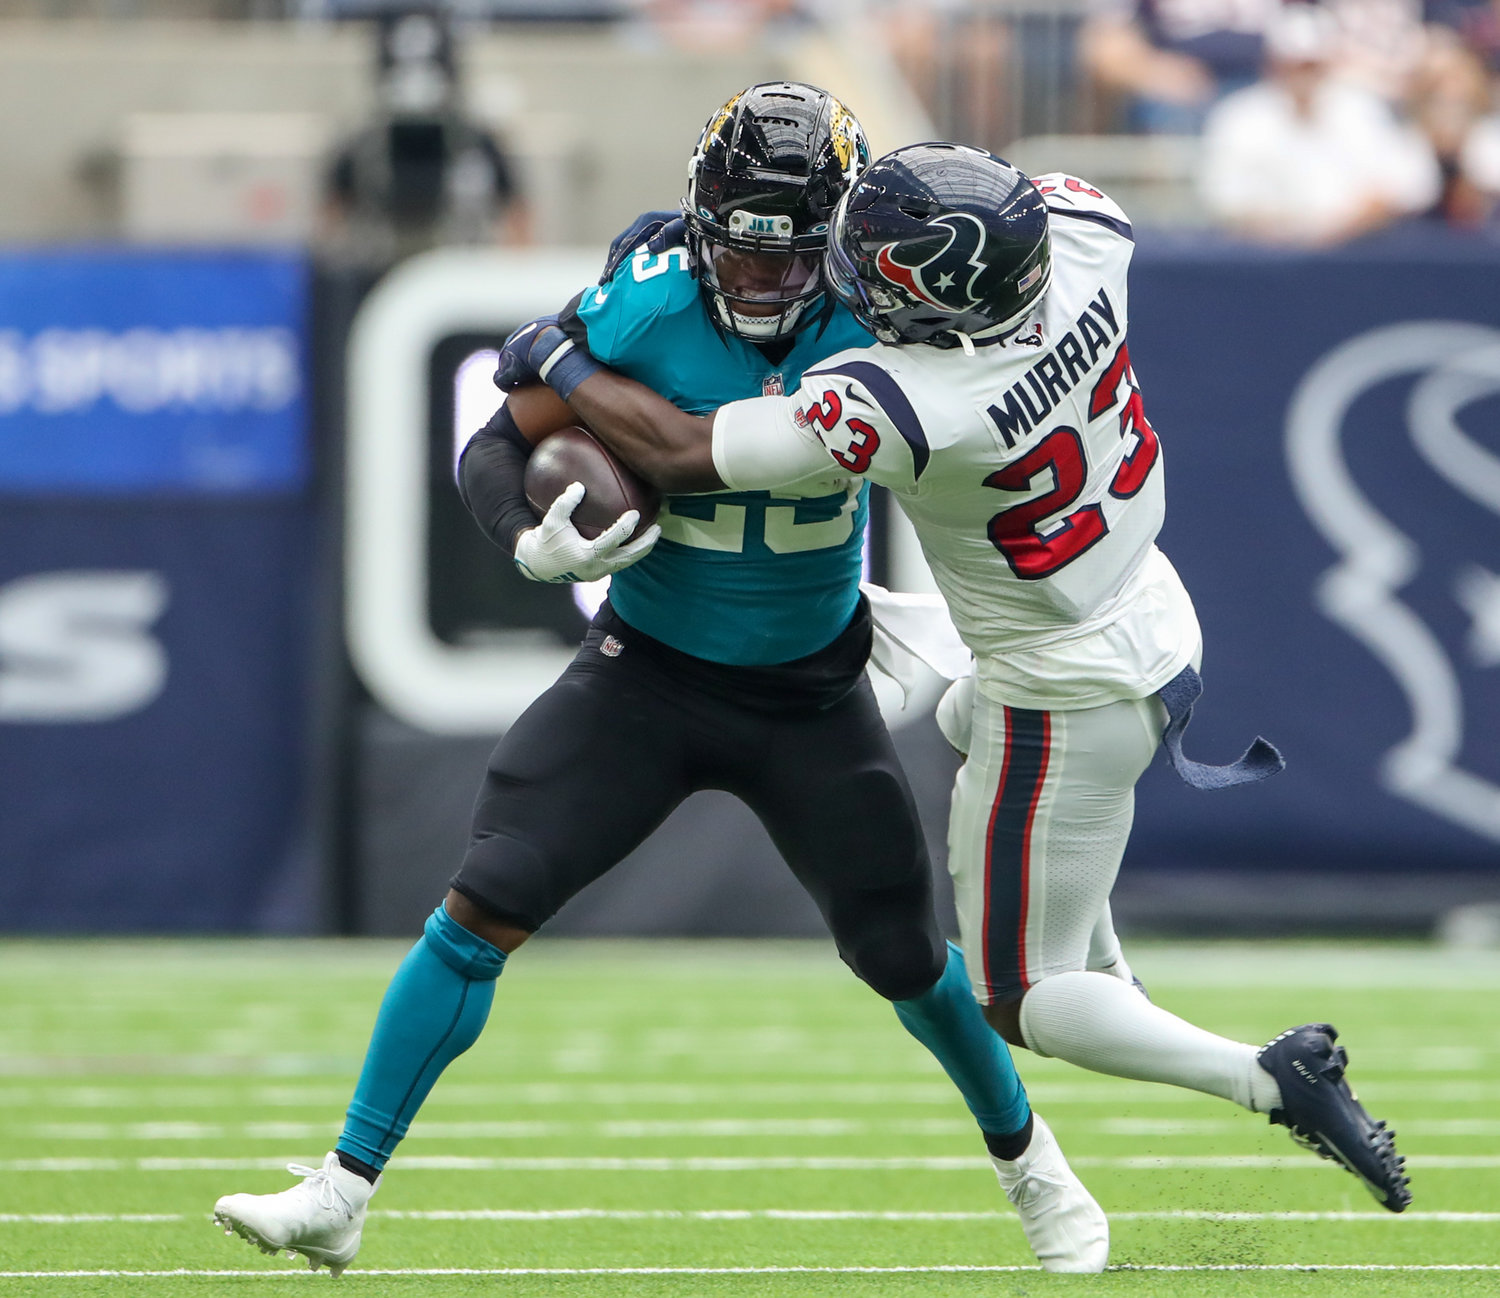 Houston Texans strong safety Eric Murray (23) brings down Jacksonville Jaguars running back James Robinson (25) during the first half of an NFL game between the Houston Texans and the Jacksonville Jaguars on September 12, 2021 in Houston, Texas.